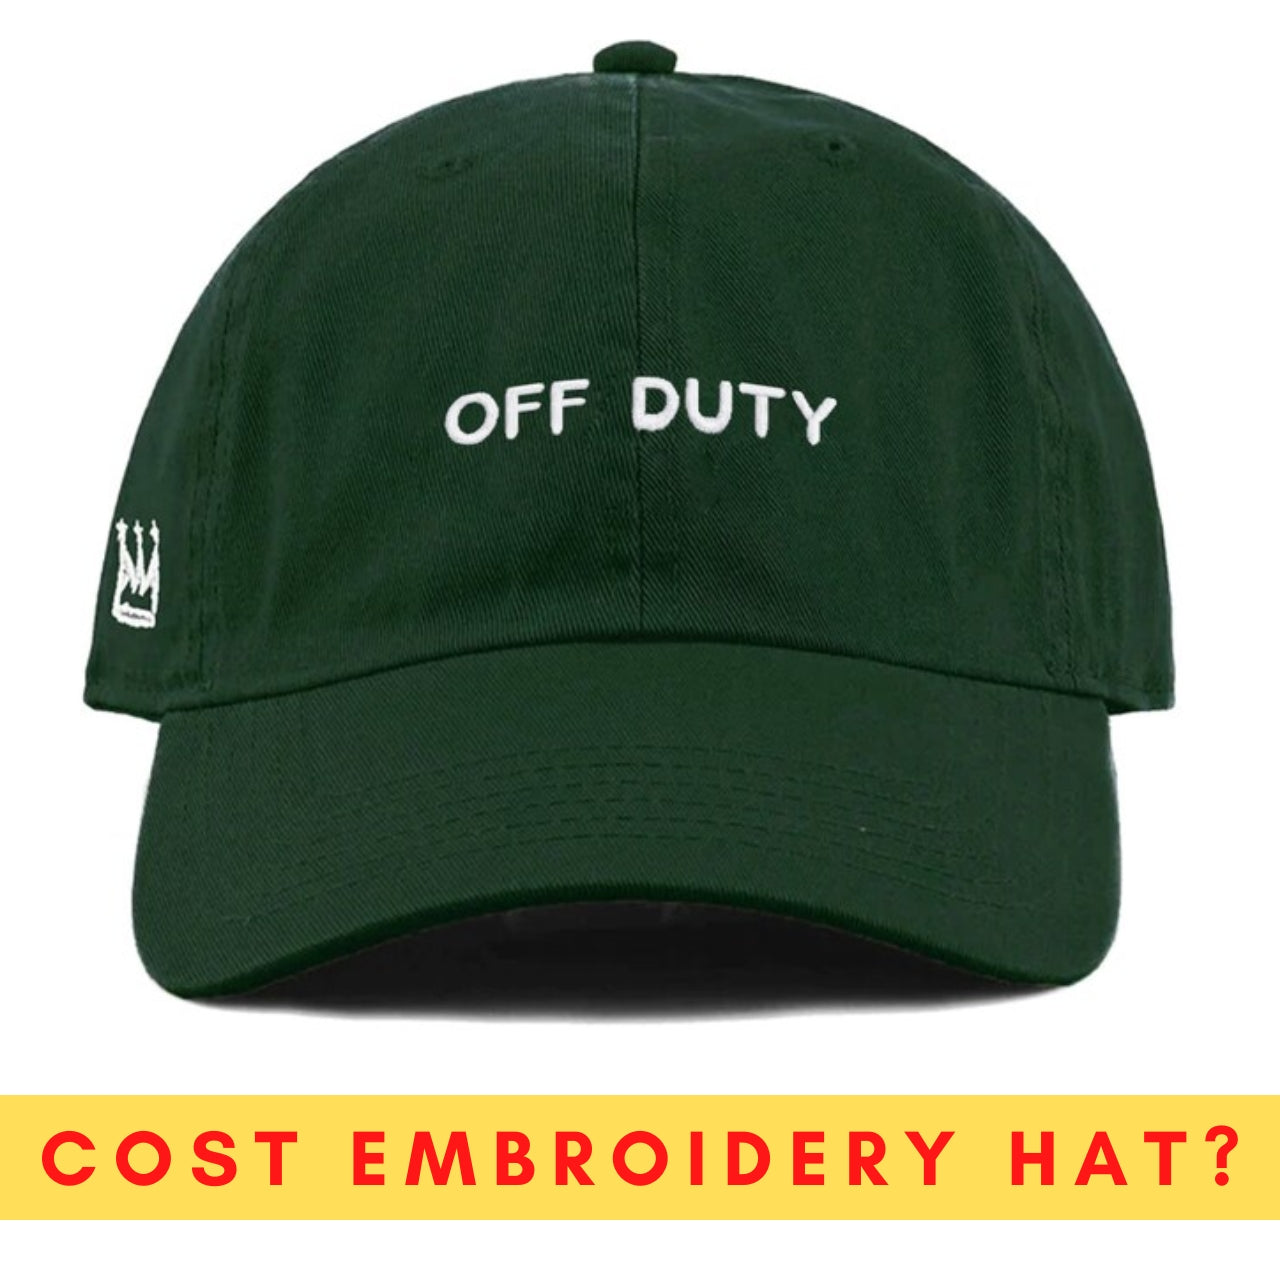 How much does it cost to get a hat embroidered?